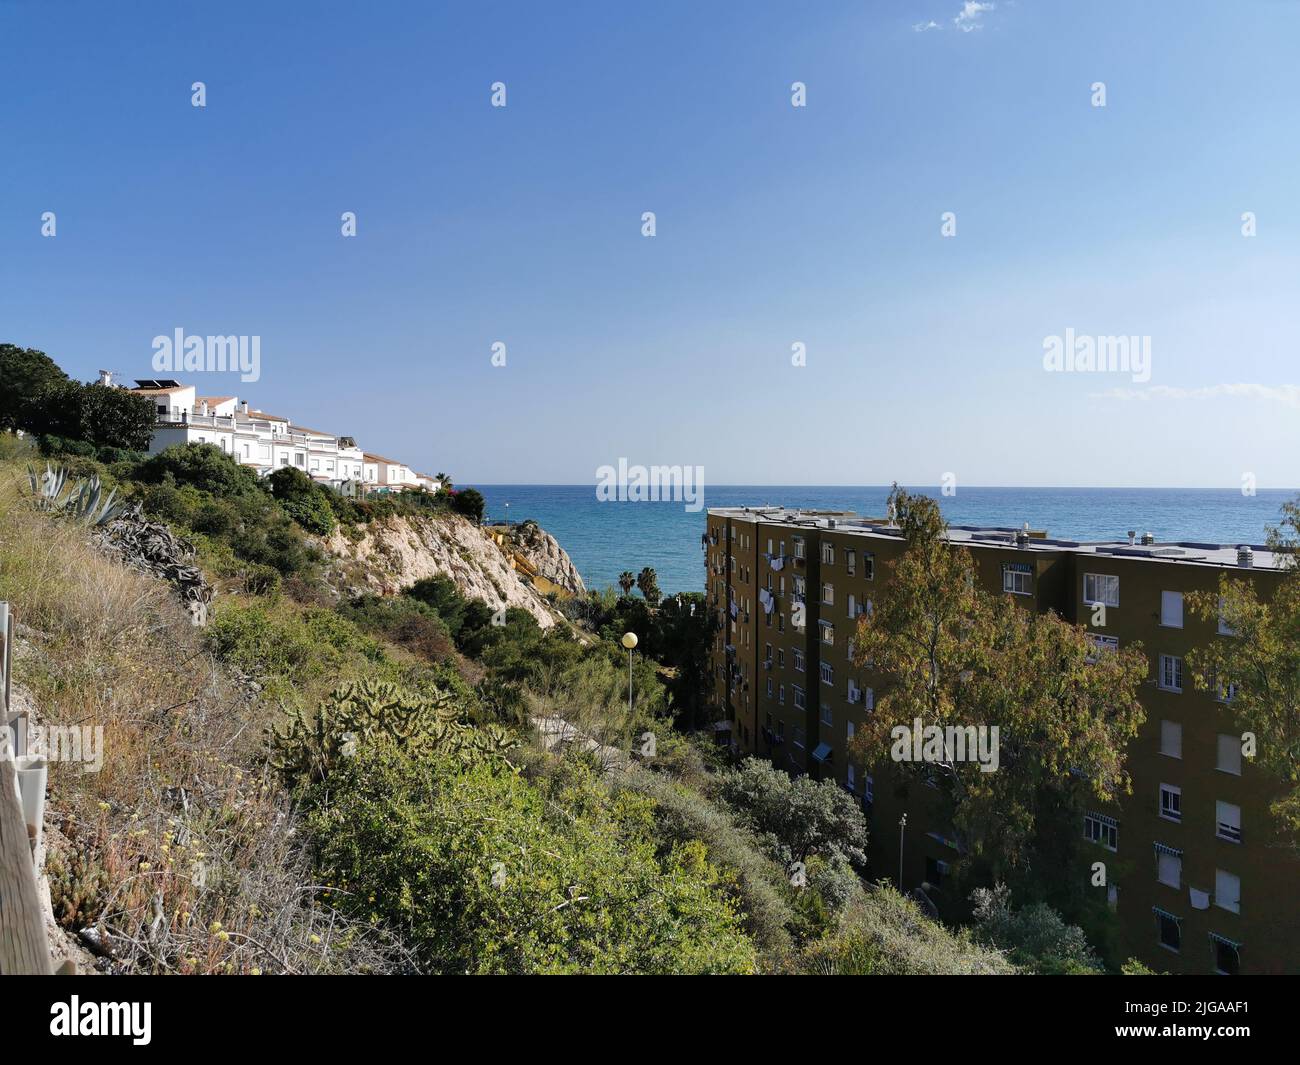 The beach and houses on the coast of La Cala del Moral, Spain during summertime Stock Photo